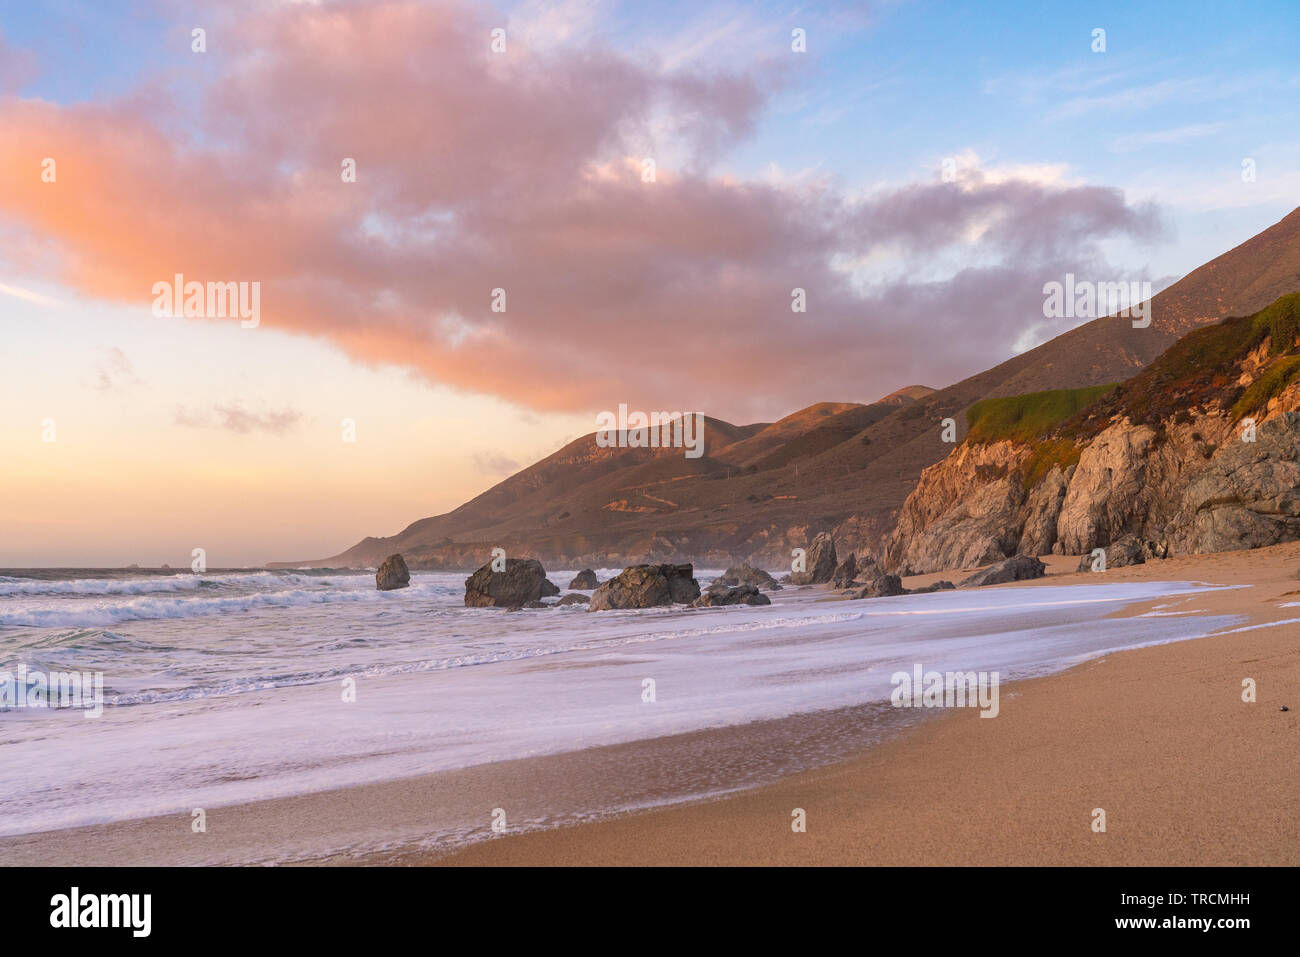 Sunset along a sandy beach with mountains in the along the coast in Big Sur, California. Stock Photo